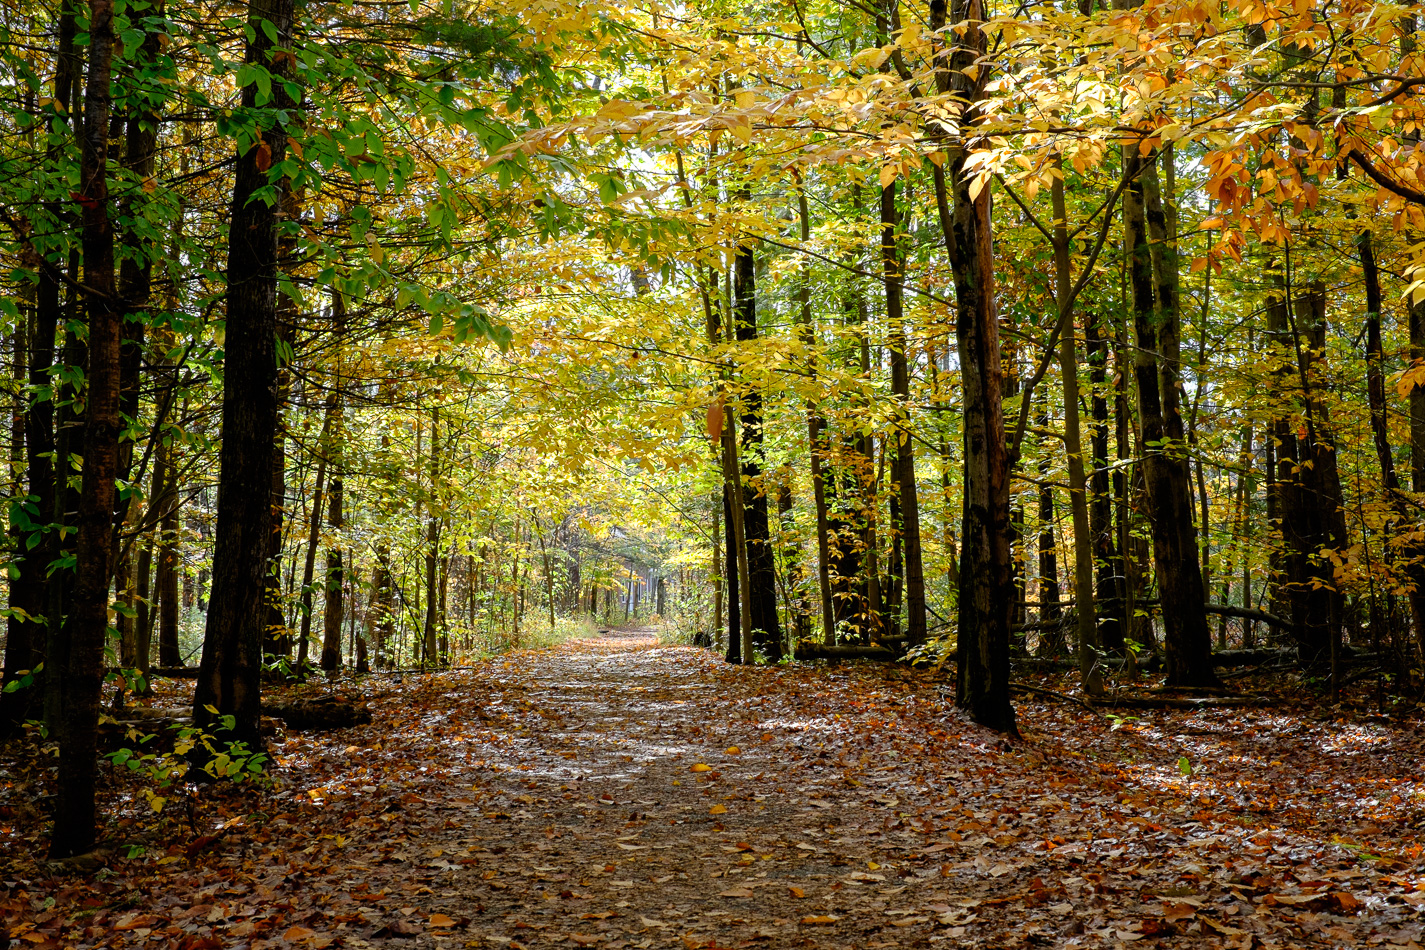 Color photo of Autumn foliage surrounding a path through the woods